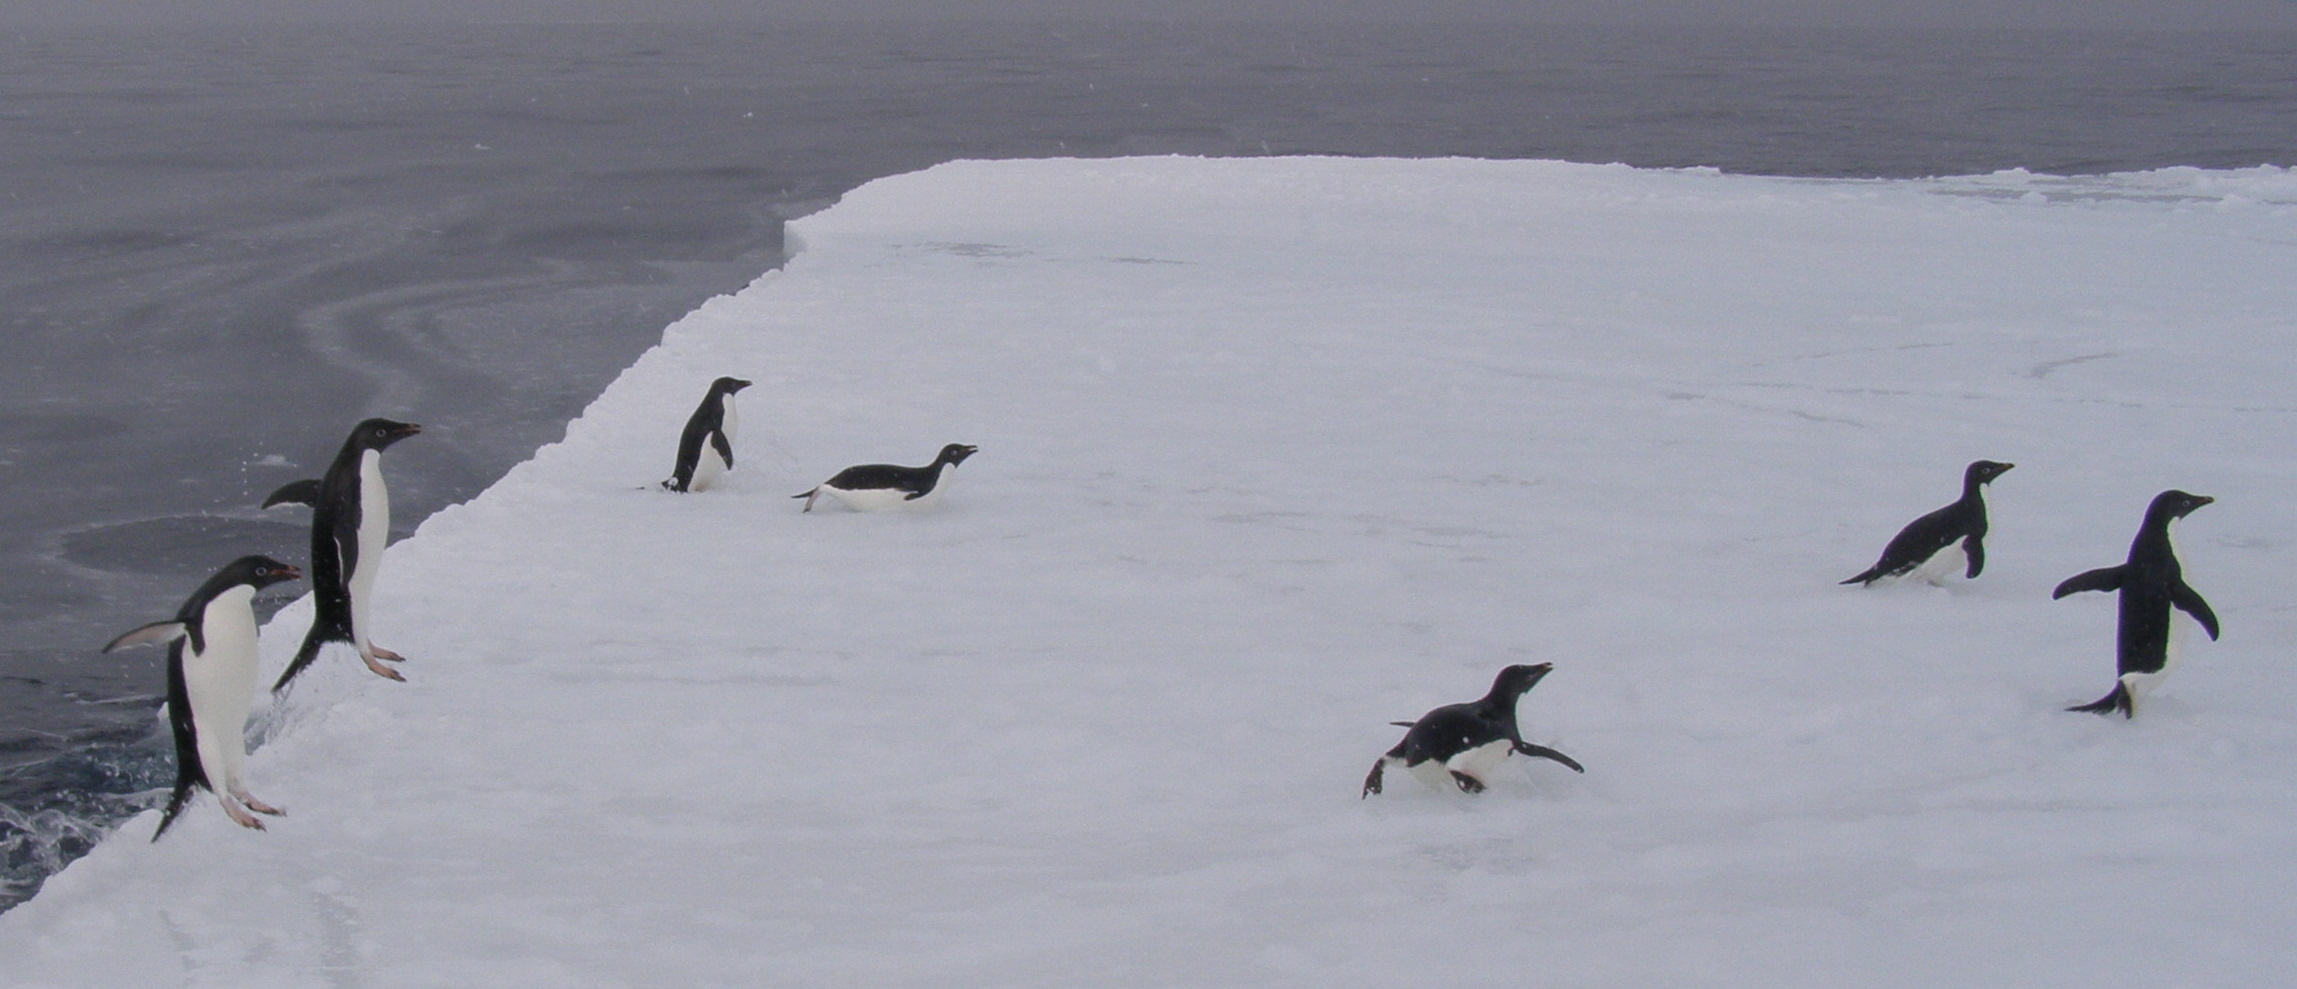 Adelie penguins pop onto the ice and join the science